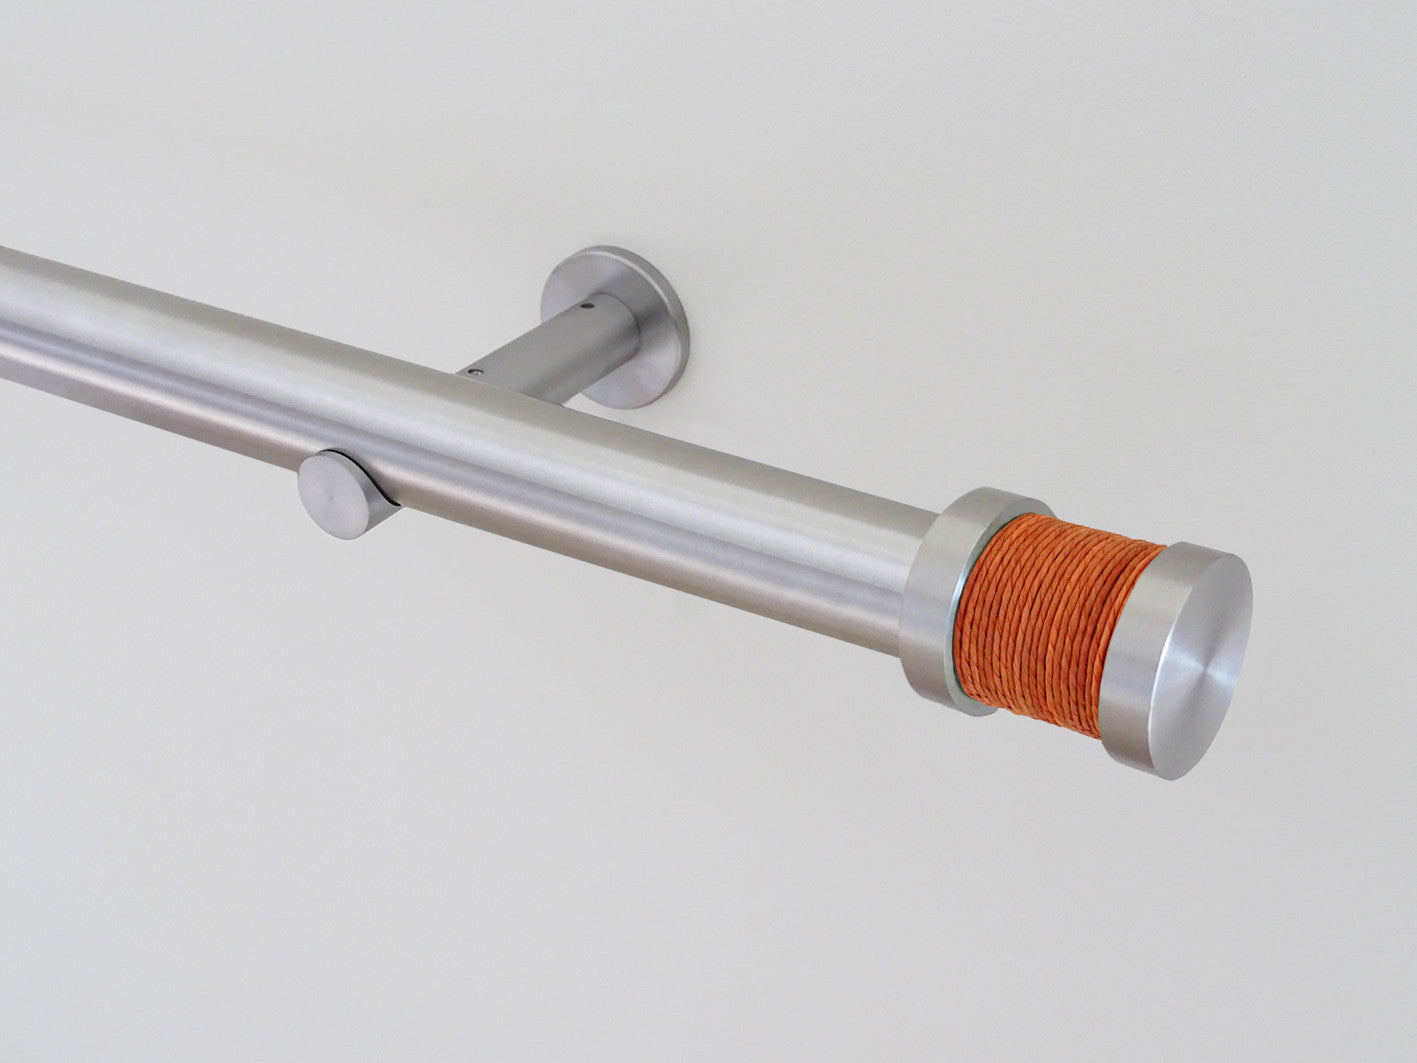 30mm diameter stainless steel curtain pole with fox groove finials